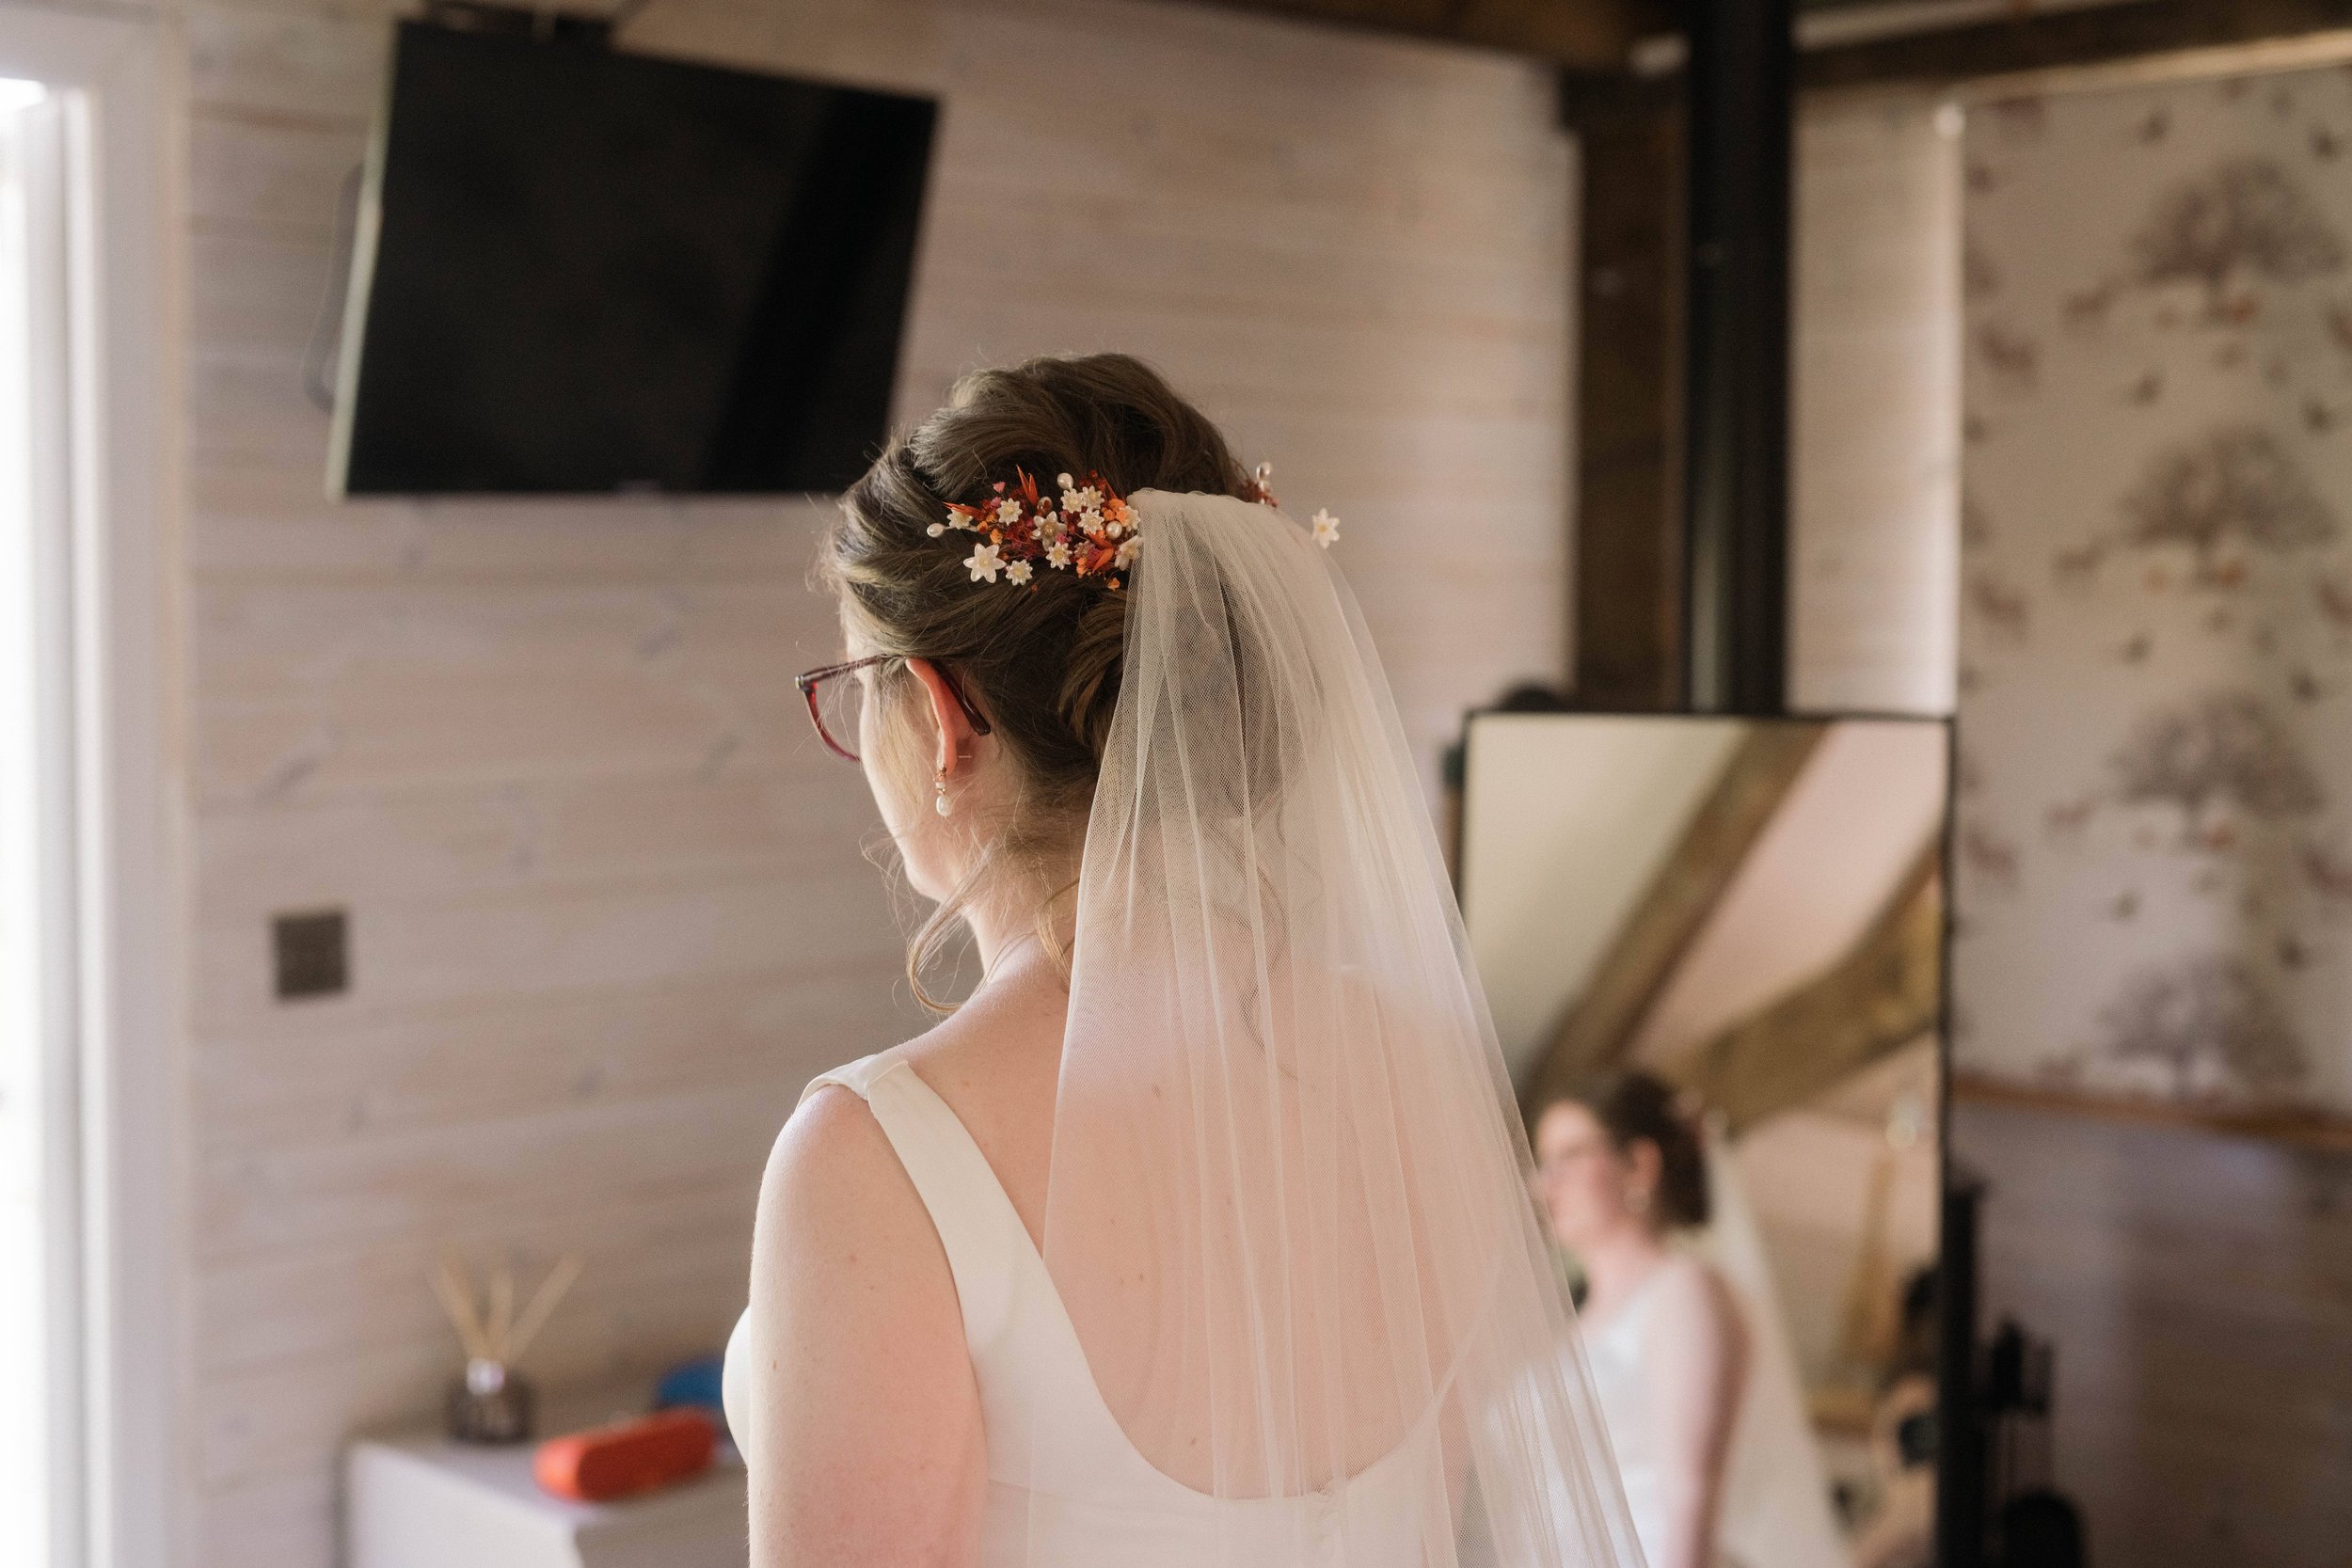  Bride getting ready with veil in her hair 